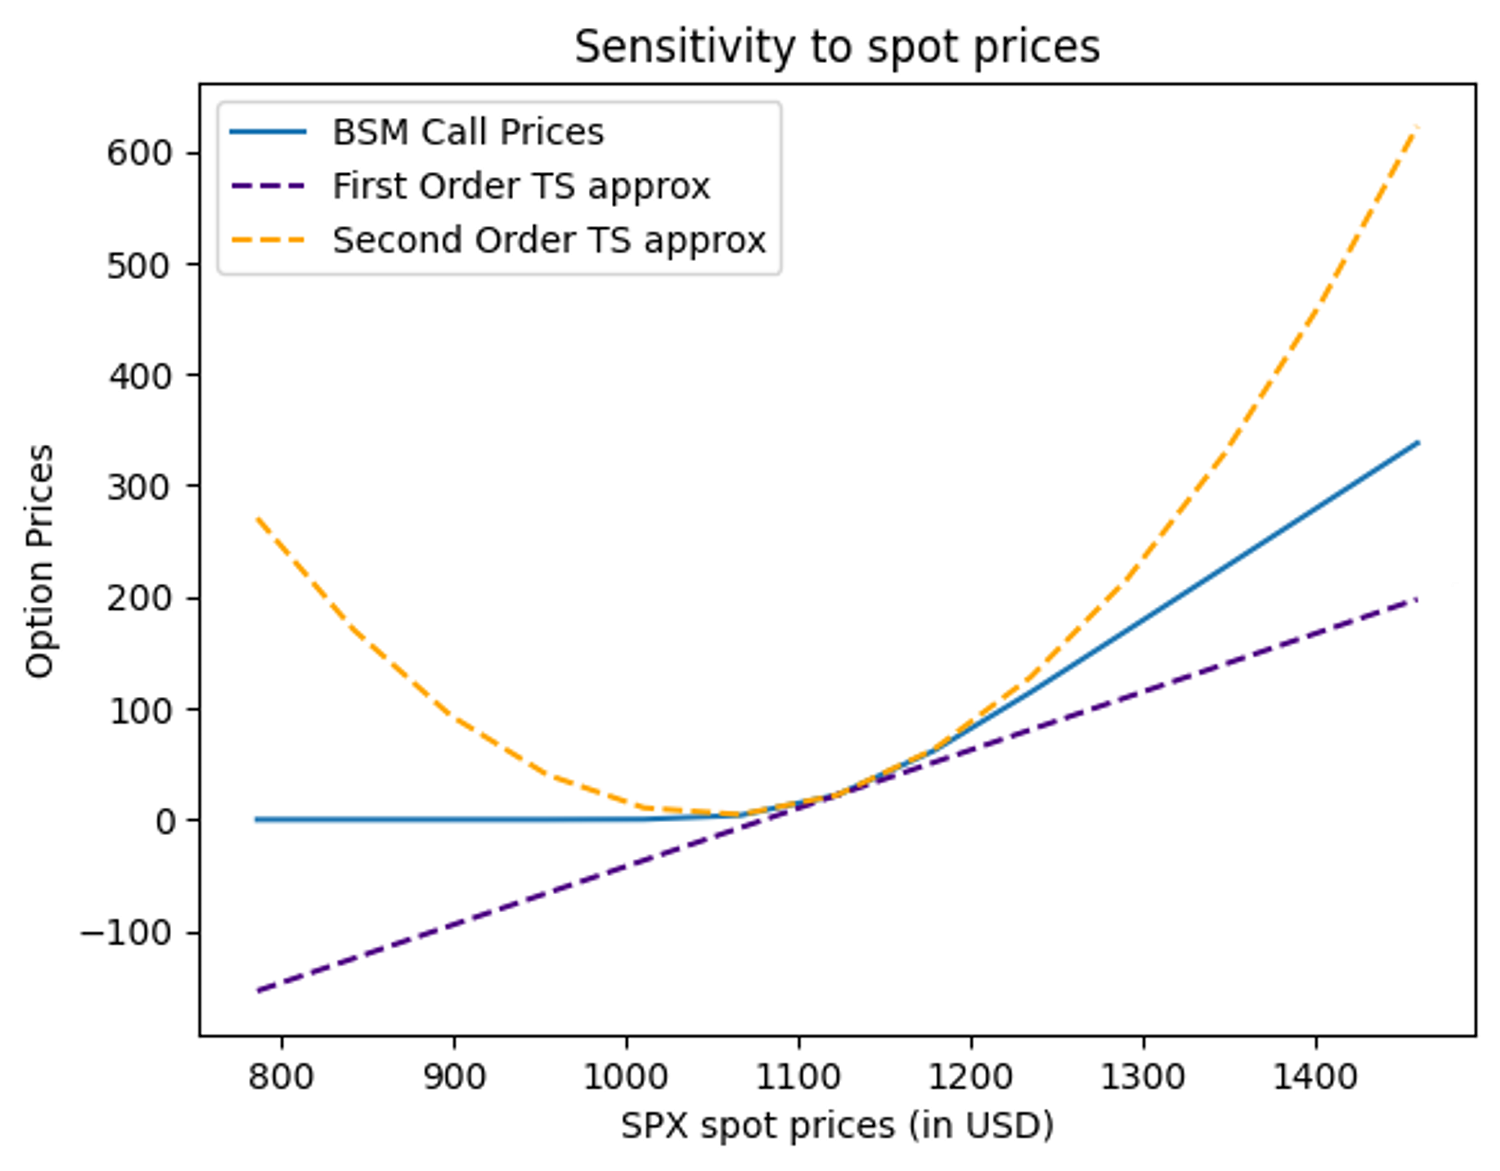 The graph shows the change in option prices for a given change in SPX spot prices. We can infer that the gap between BSM price and TS approximation is lower at the strike and the gap widens as we approximate away from the strike.